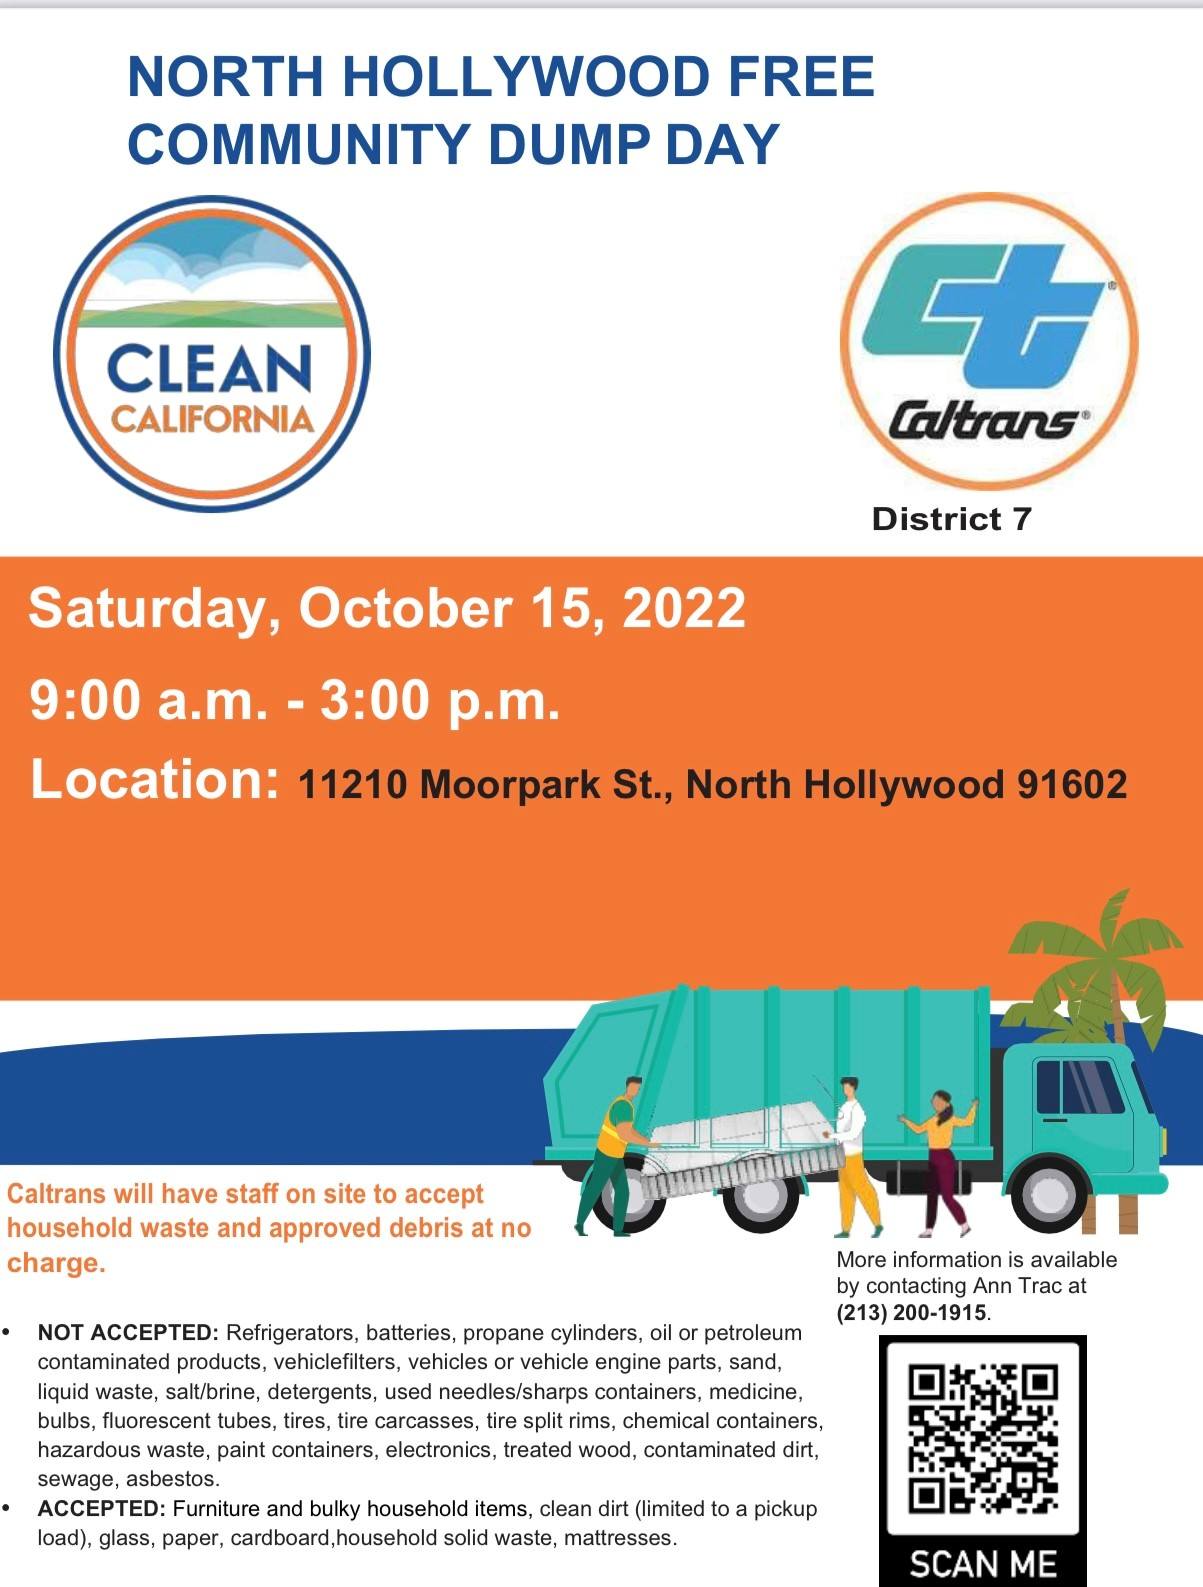 Caltrans District 7 is Offering a Free Community Dump Day on Saturday, October 15th